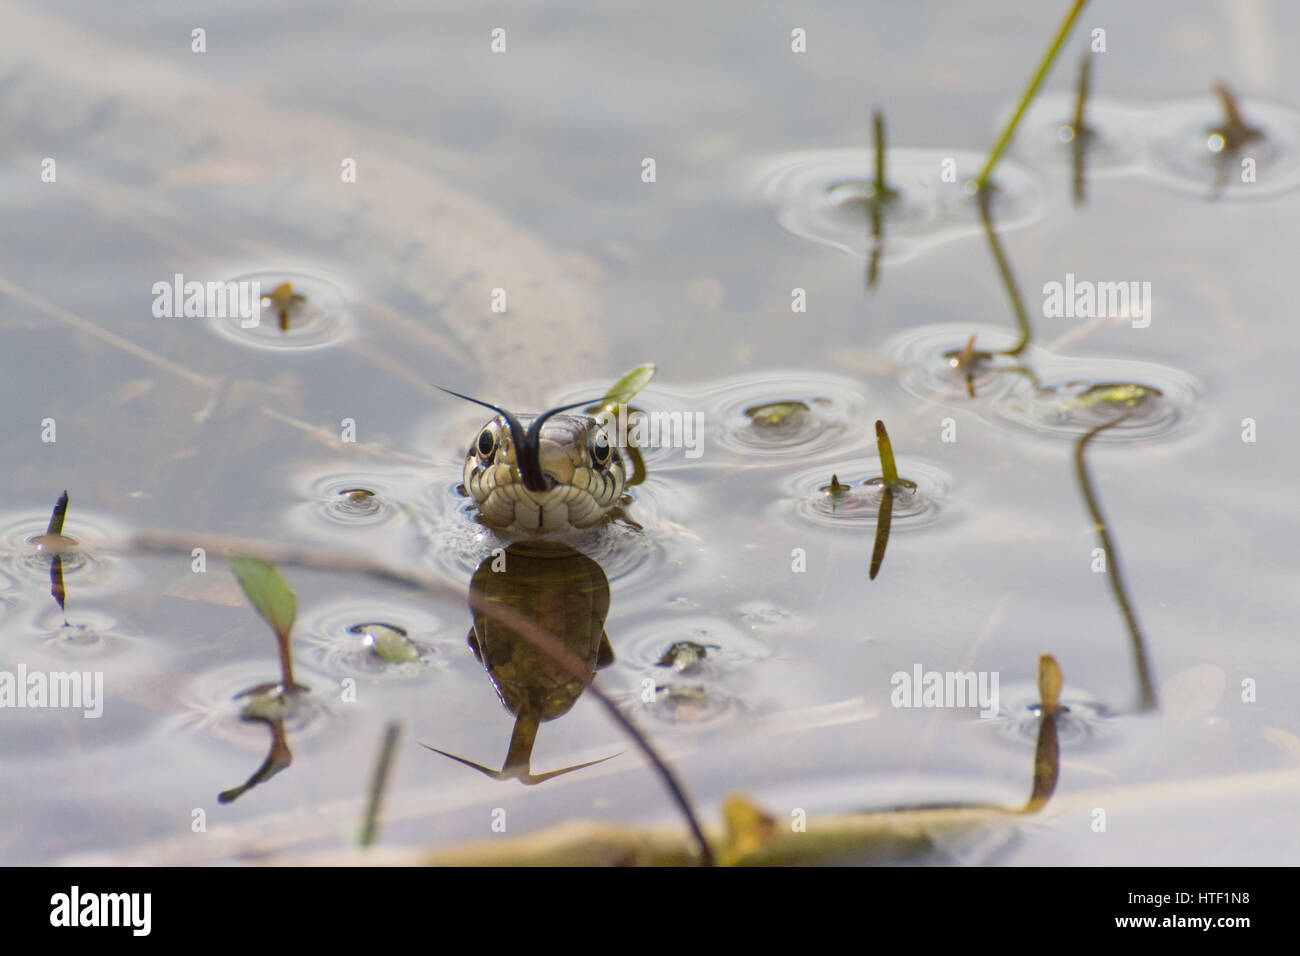 Close-up of a grass snake (Natrix helvetica) swimming in a pond, UK - head shot with tongue flicking (chemosensing) Stock Photo